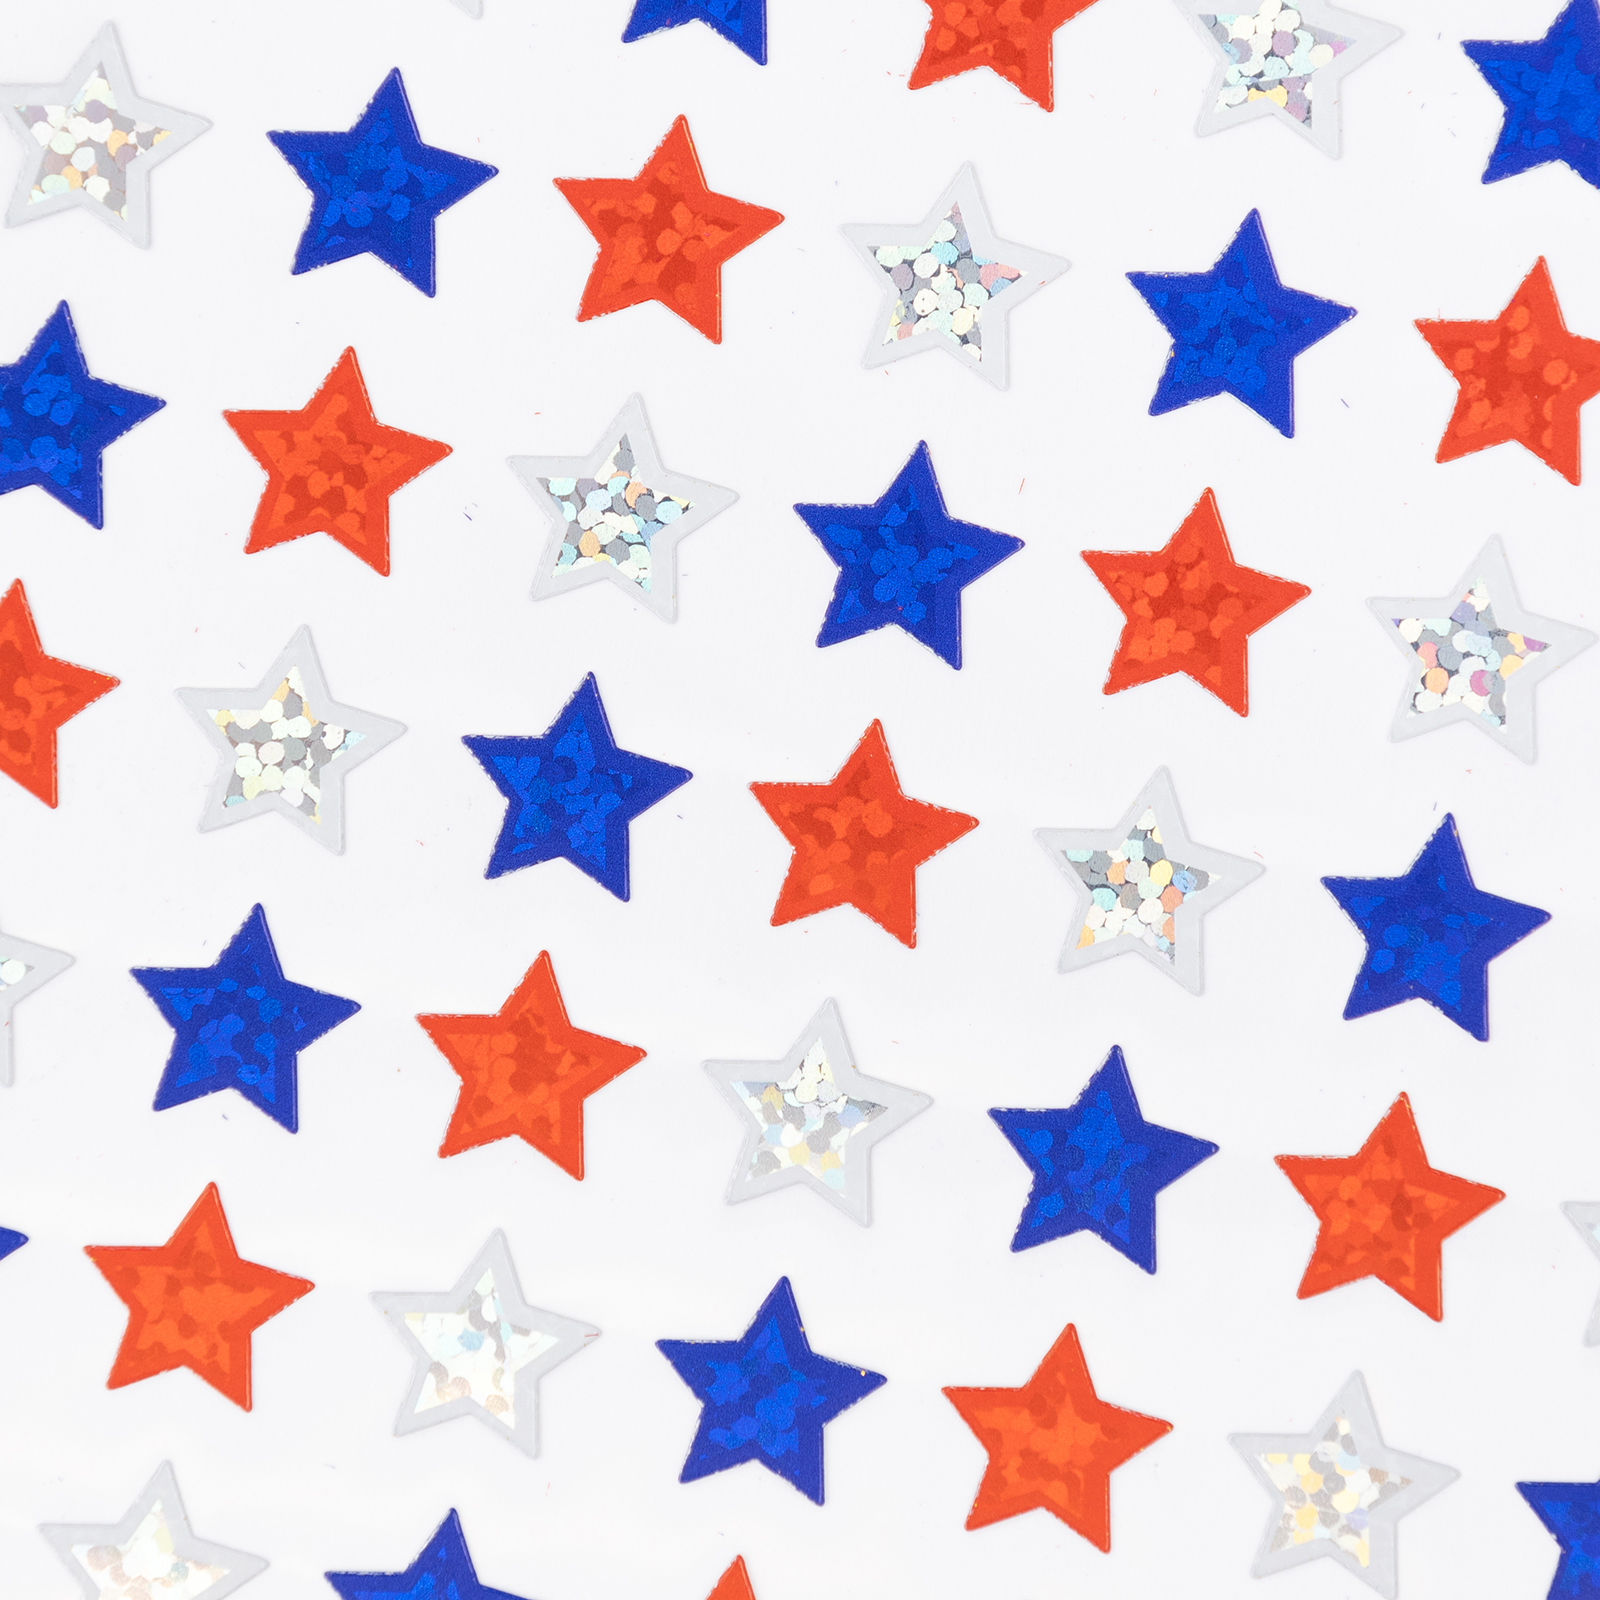 Sticko Solid Classic 4th Of July Multicolor Star Repeats Plastic Stickers, 98 Piece - image 4 of 4